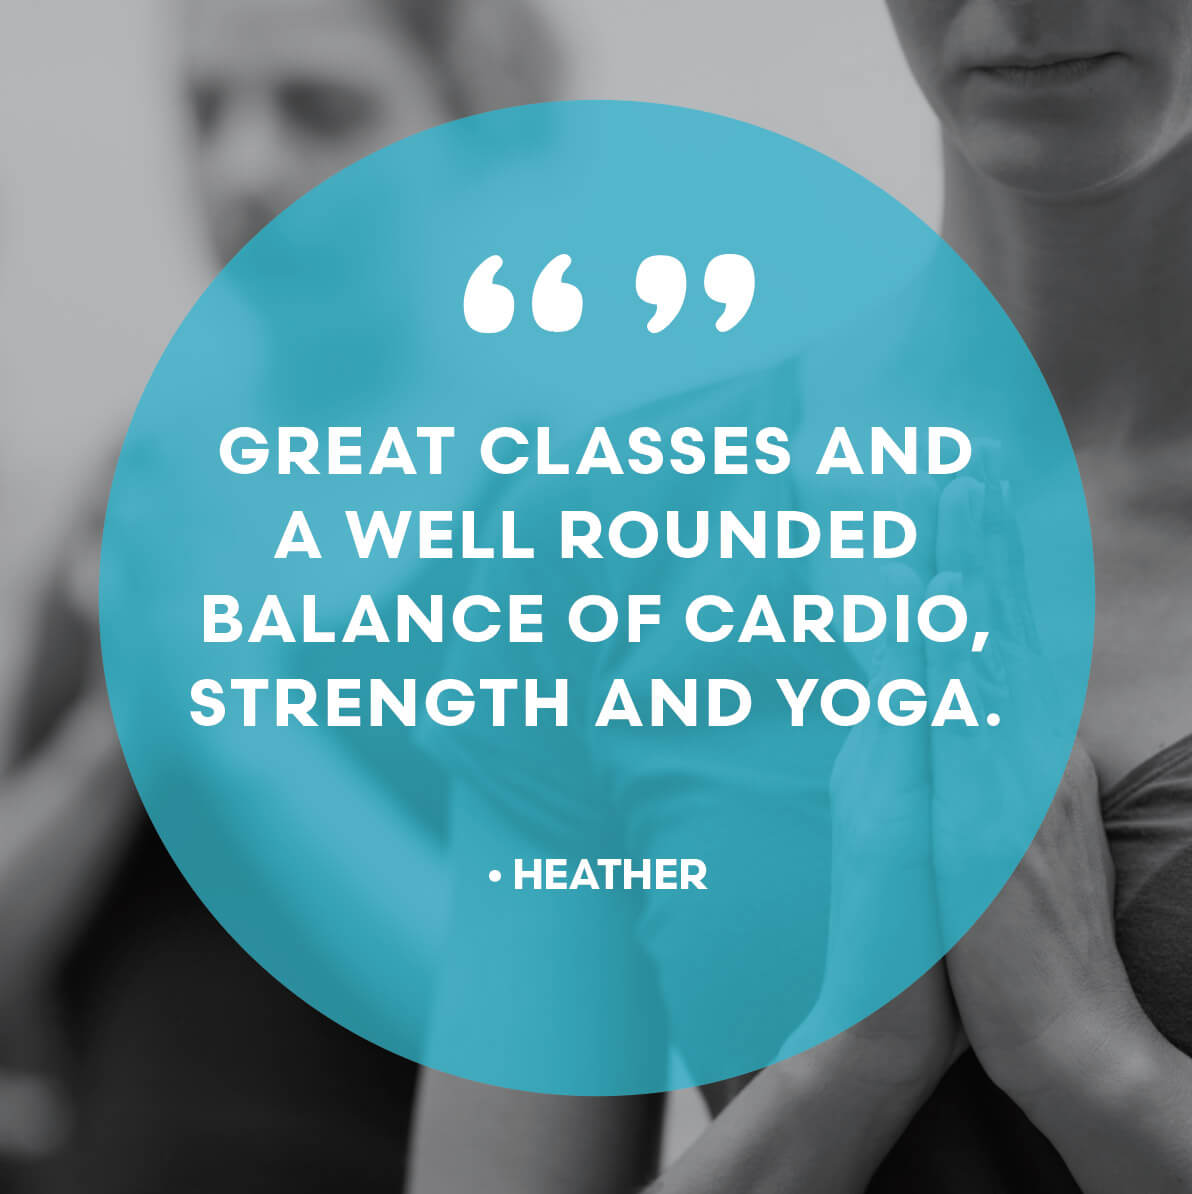 Great classes and a well-rounded balance of cardio, strength and yoga.